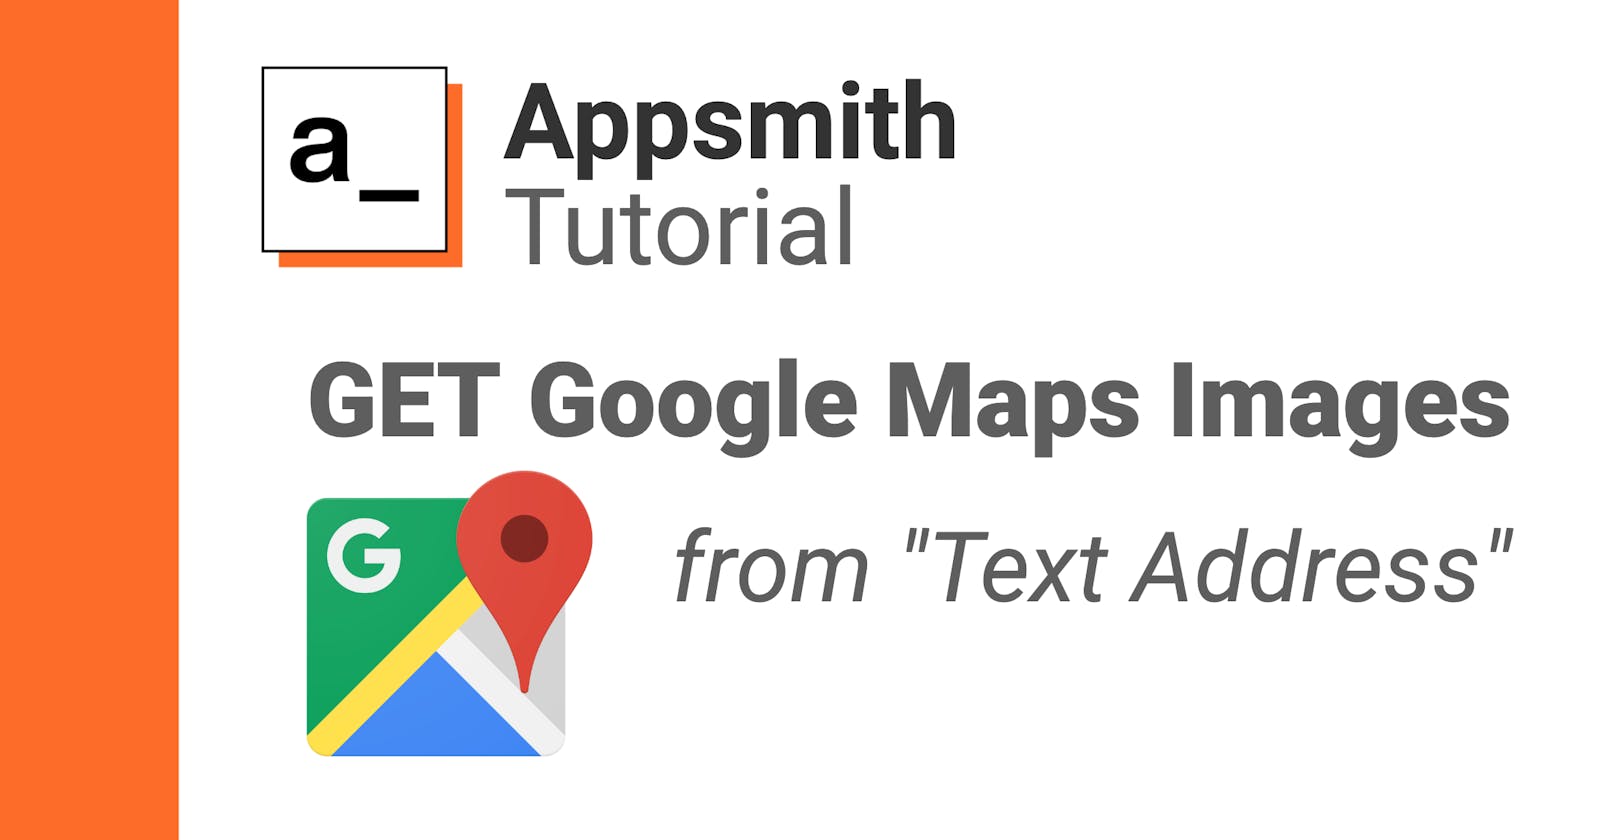 GET Google Maps Images from Address Text